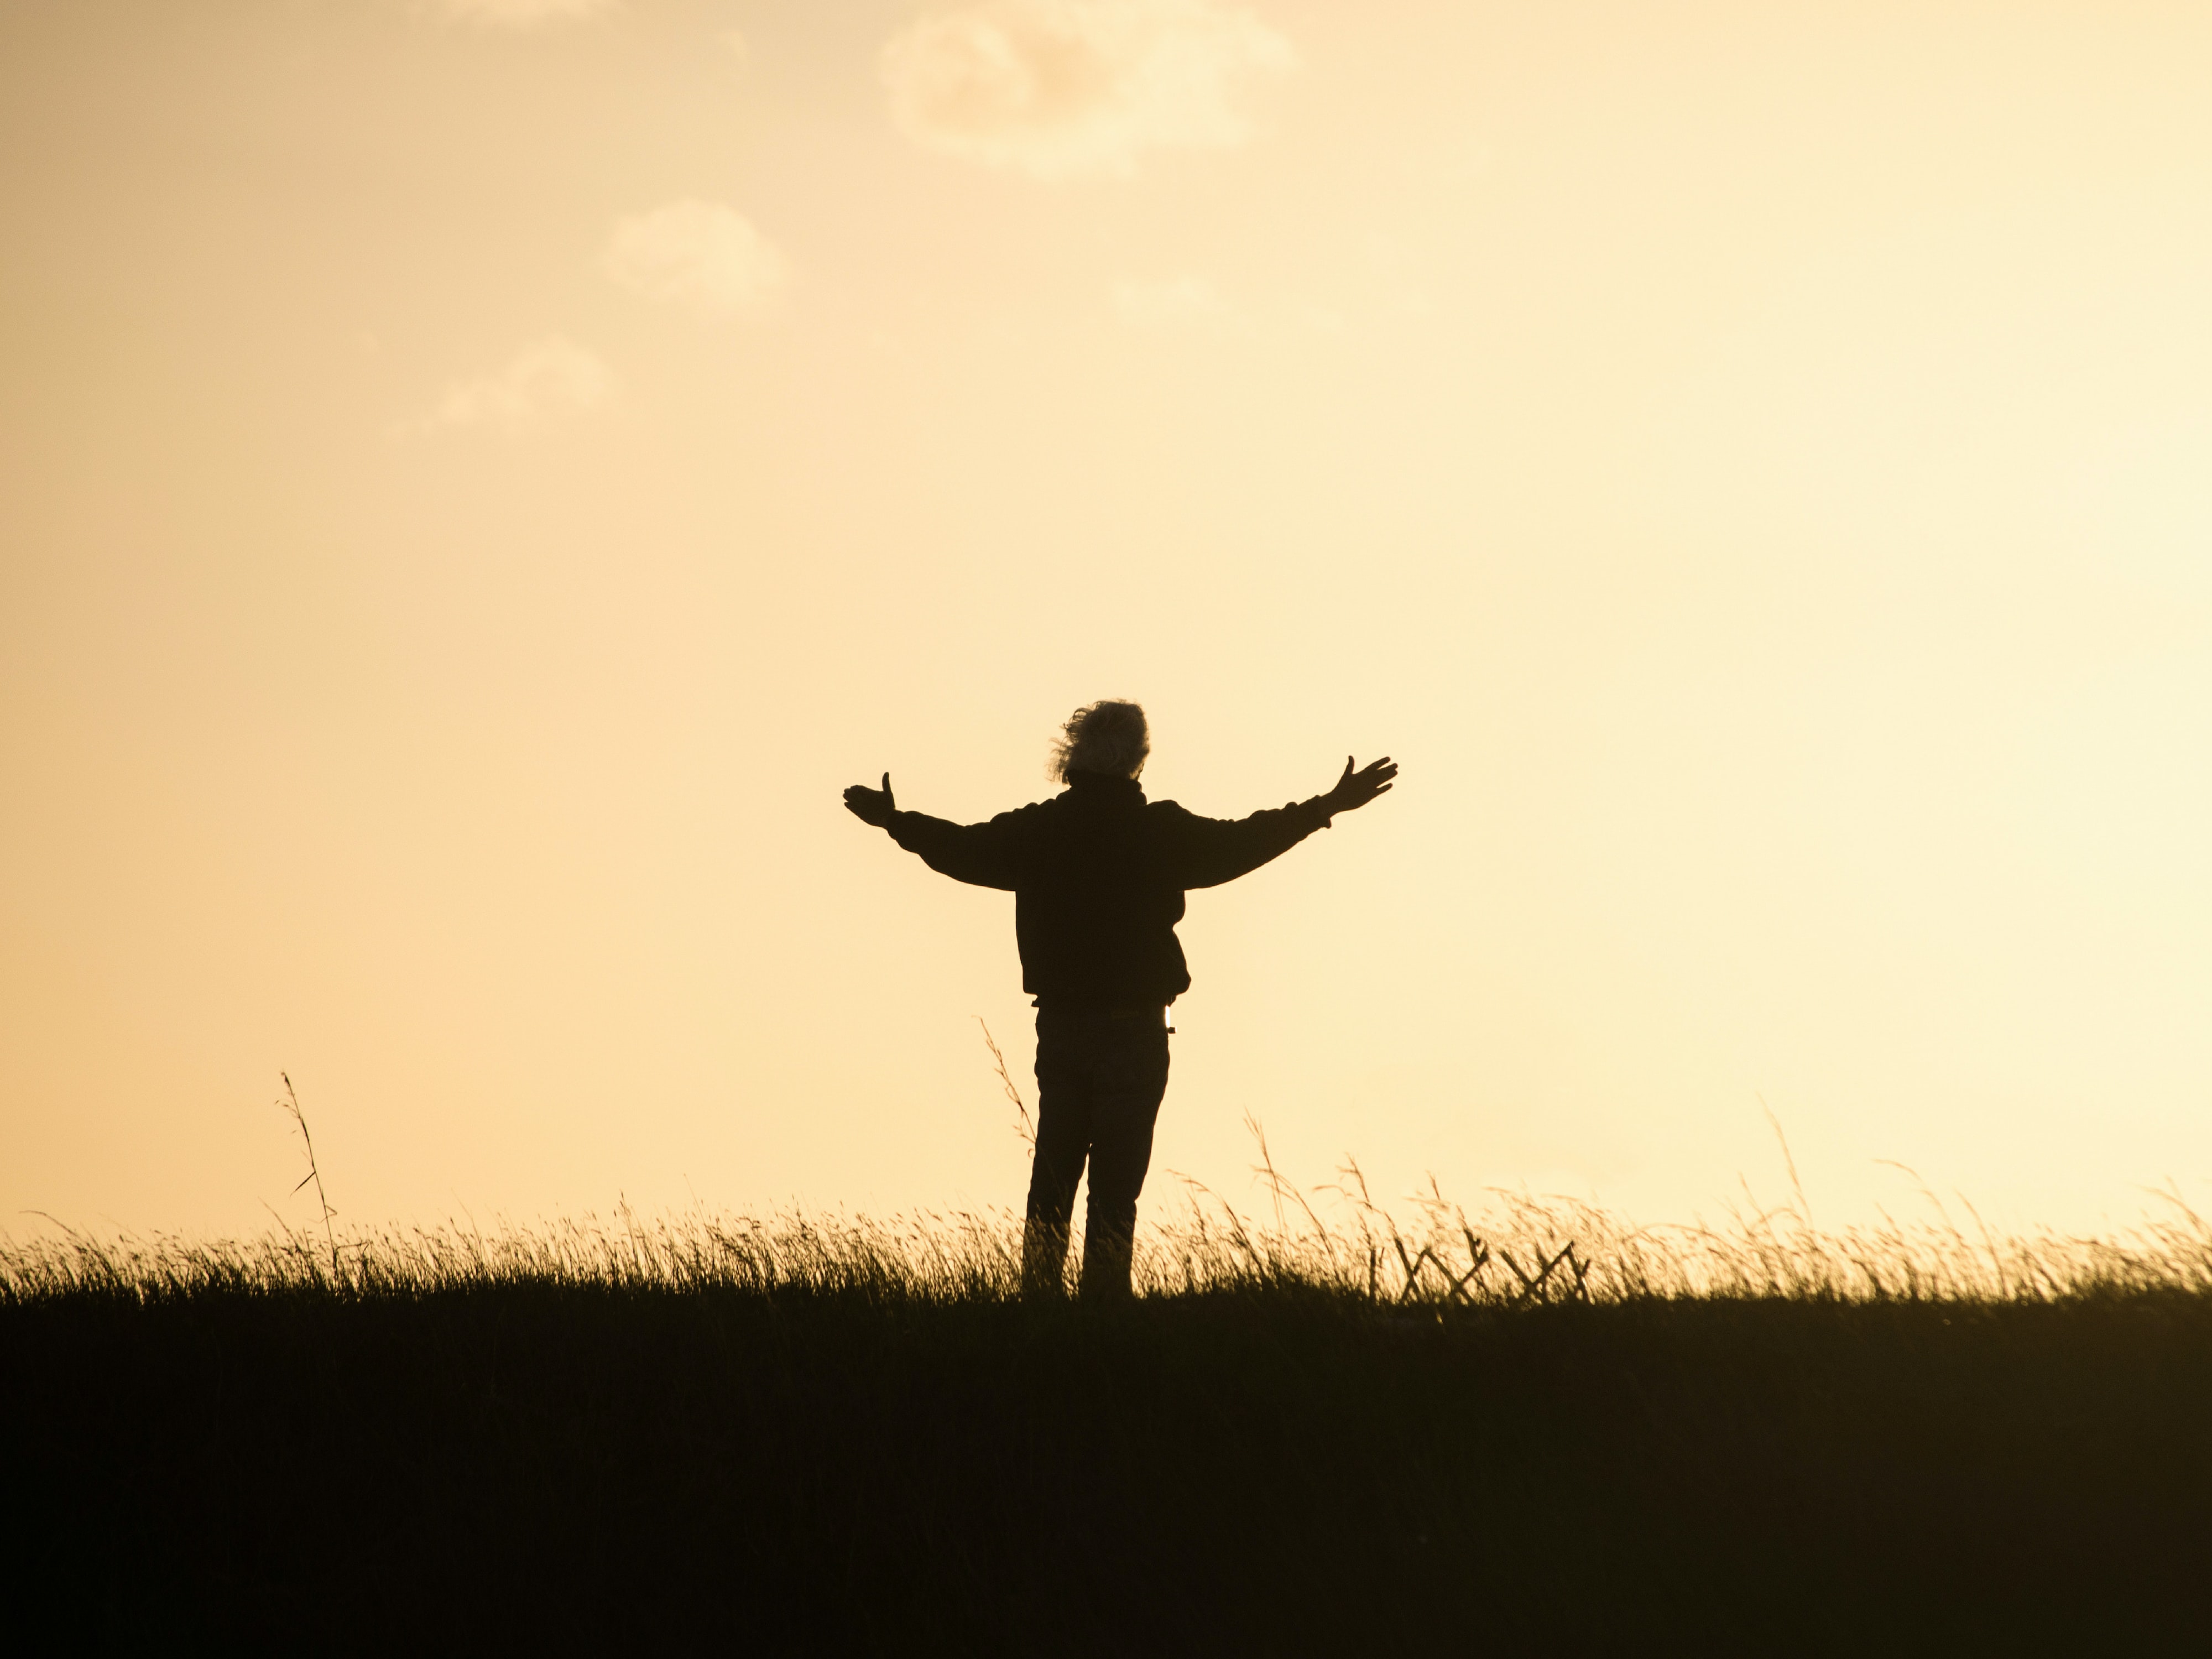 silhouette of a person in a field during sunset, arms outstretched